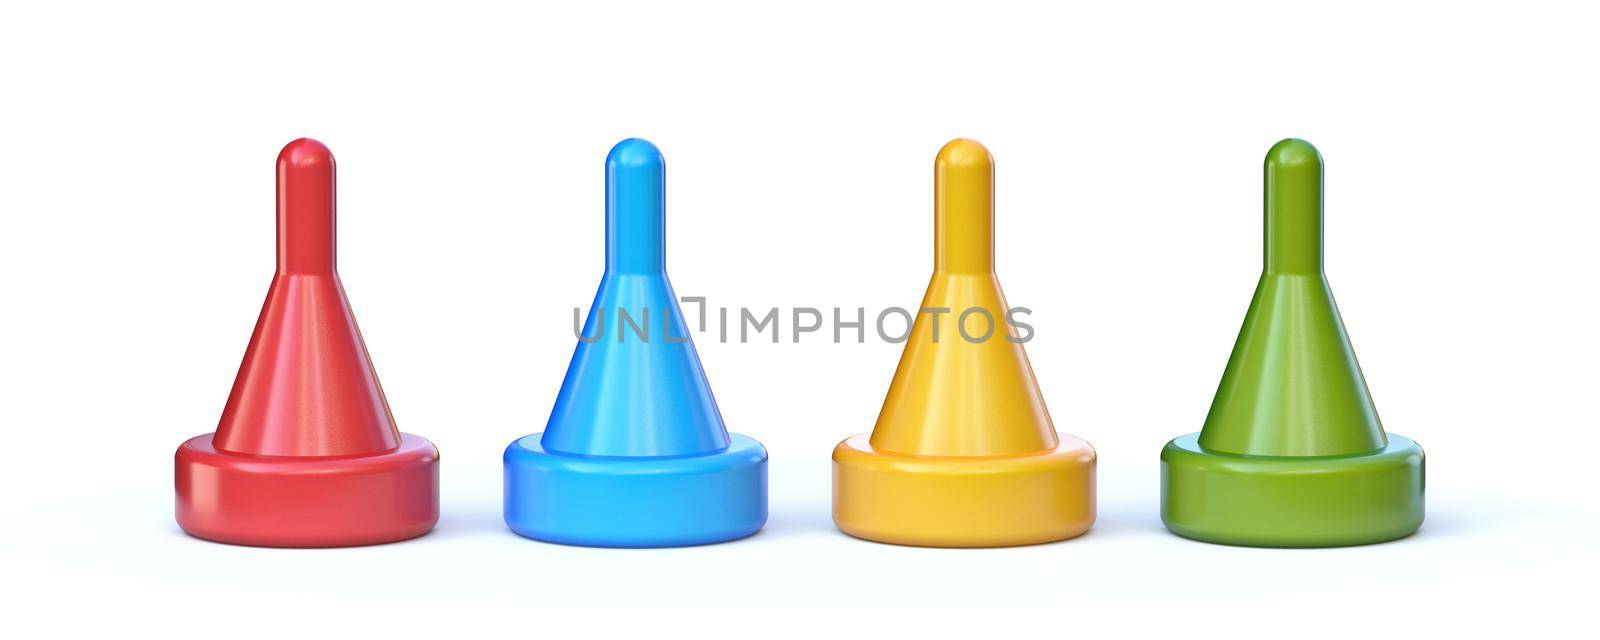 Four game pawns 3D rendering illustration isolated on white background